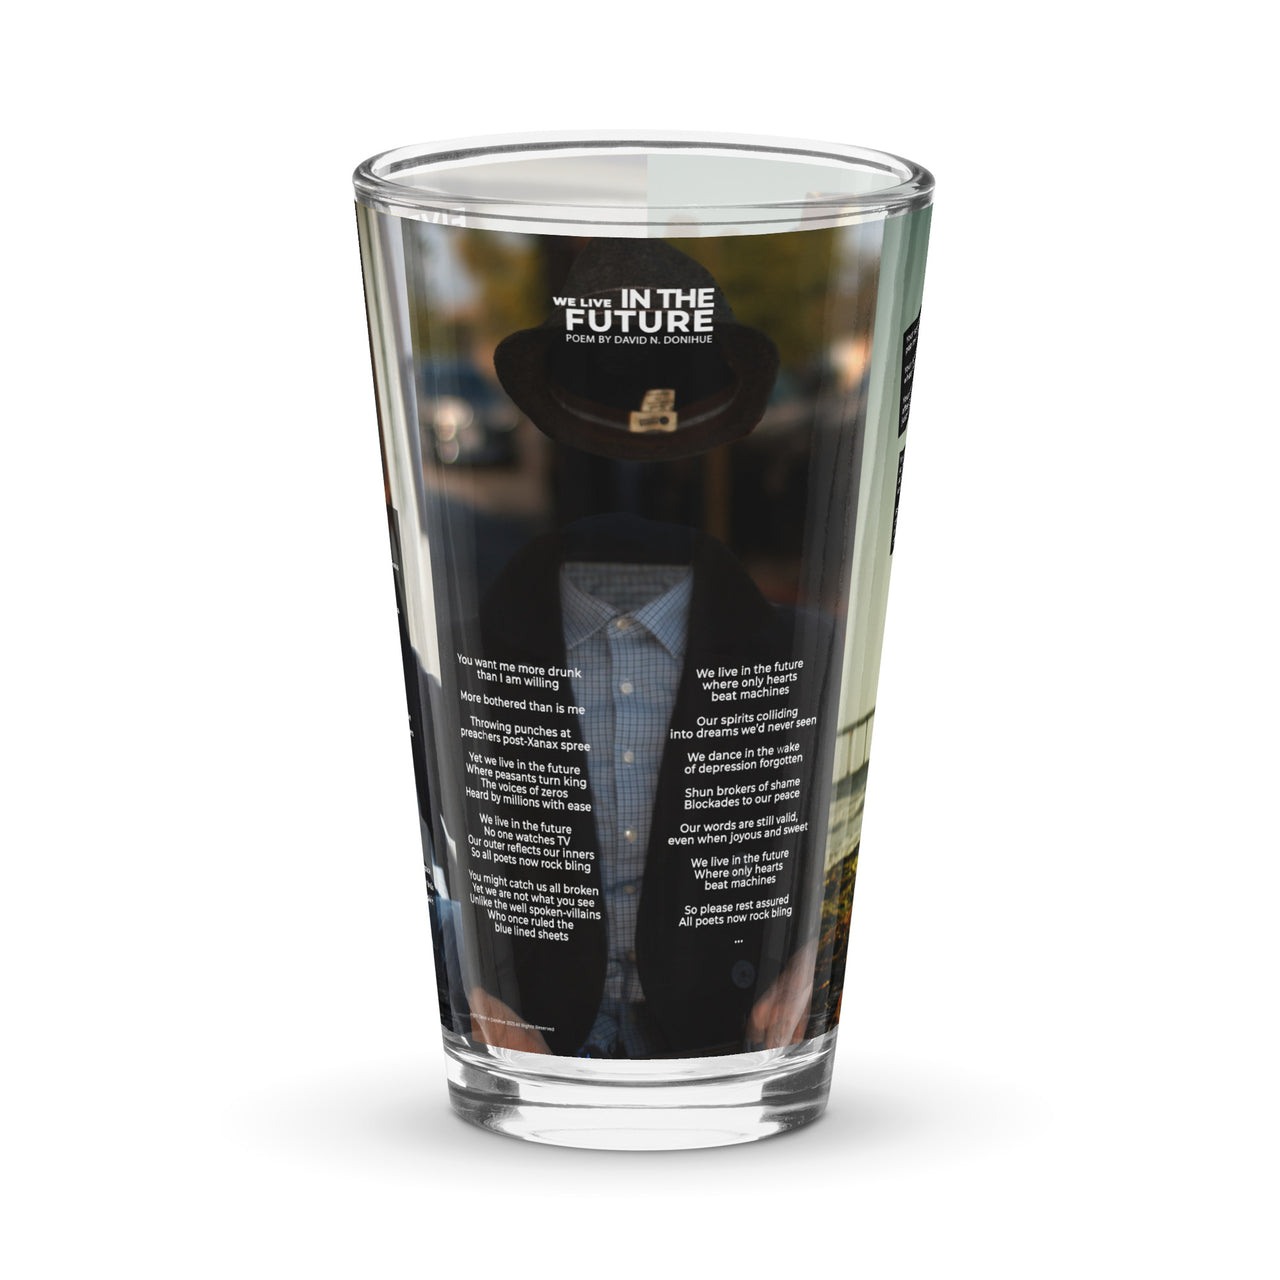 3 POEMS ON A PINT GLASS: "We Live In The Future (aka Poets Rock Bling)" "Pop Music" and "Five Steps Forward (aka You Lied Poem)